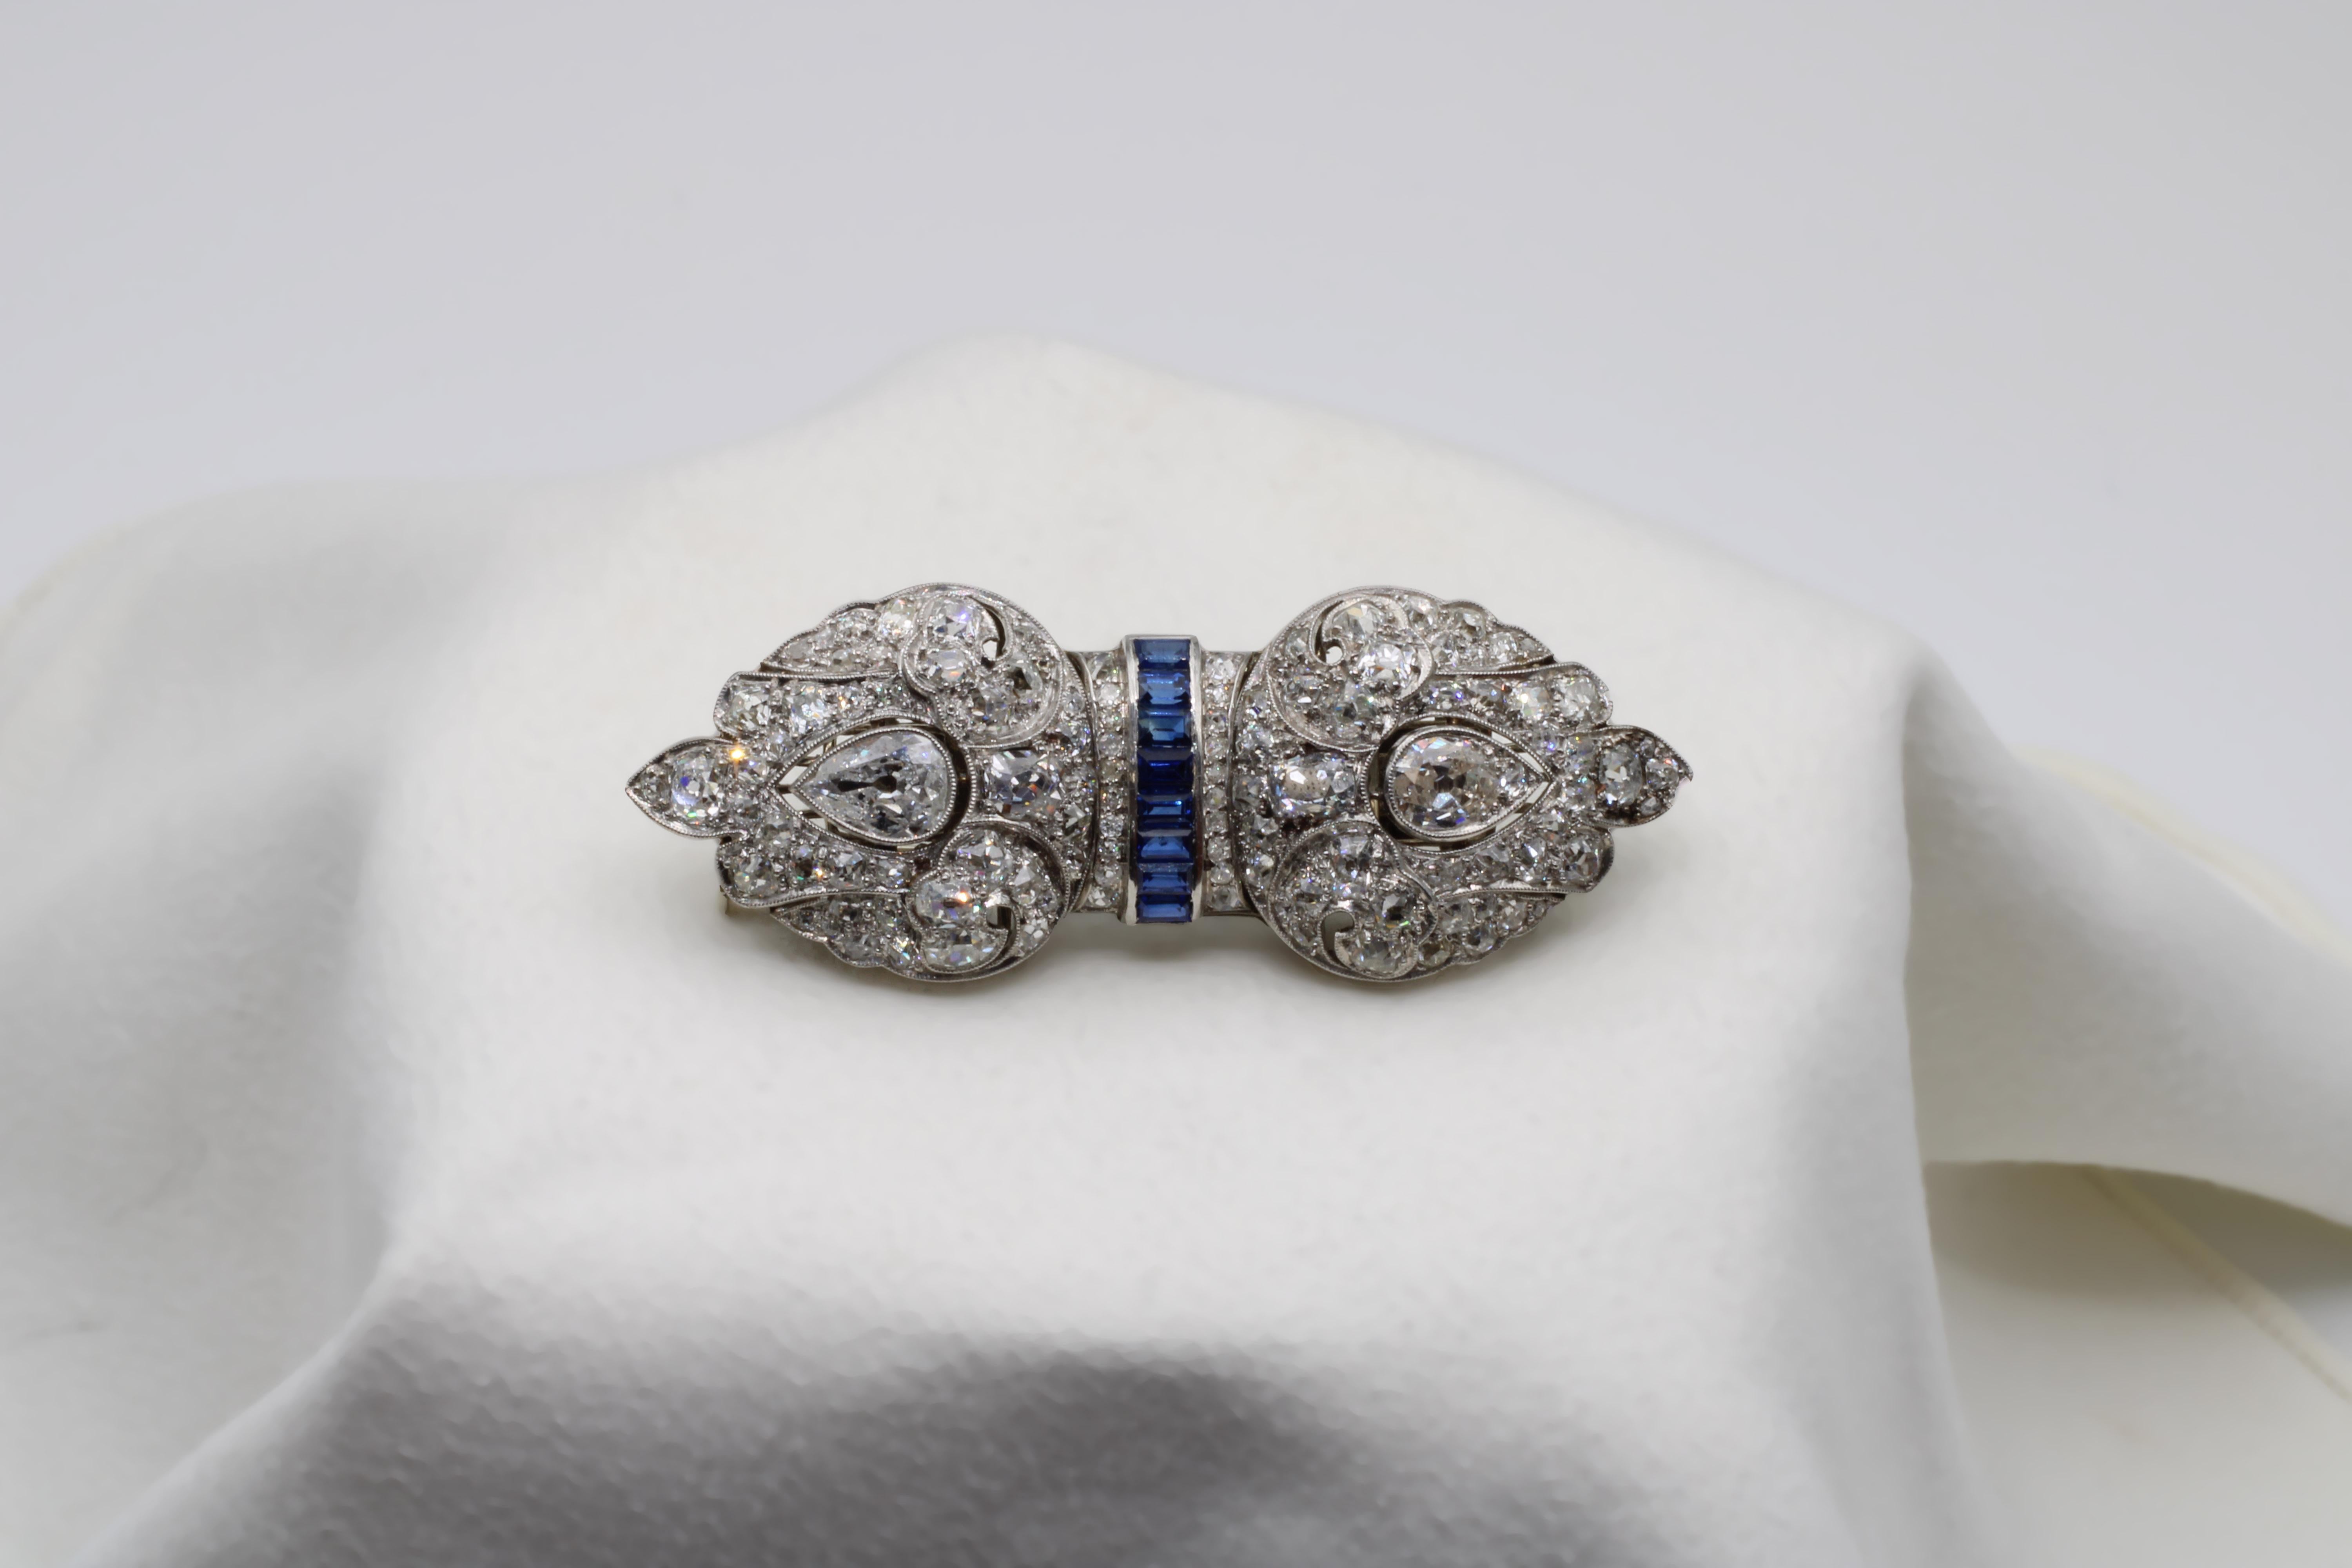 A surreal piece drenched in 14.40 carats of Old European and Old Miner Diamonds restricted to not just one brooch, but two. Featuring over 120 stones, including two 1.20 Old European Pear Cuts, and held together by royal blue sapphires, this piece